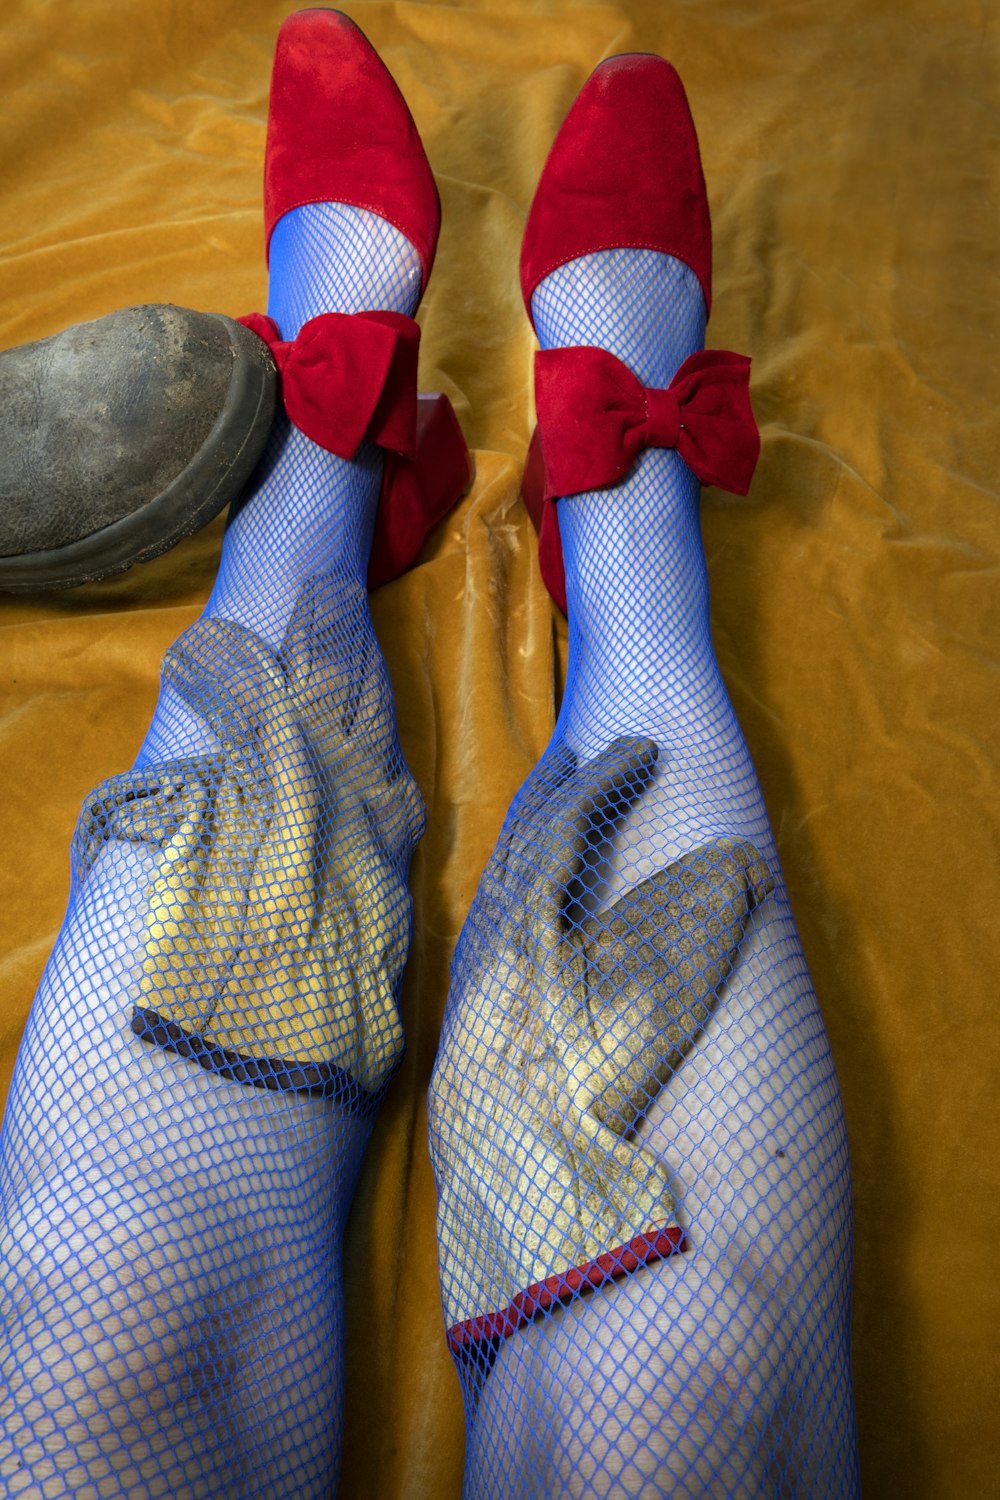 a pair of feet wearing red shoes and blue mesh stockings